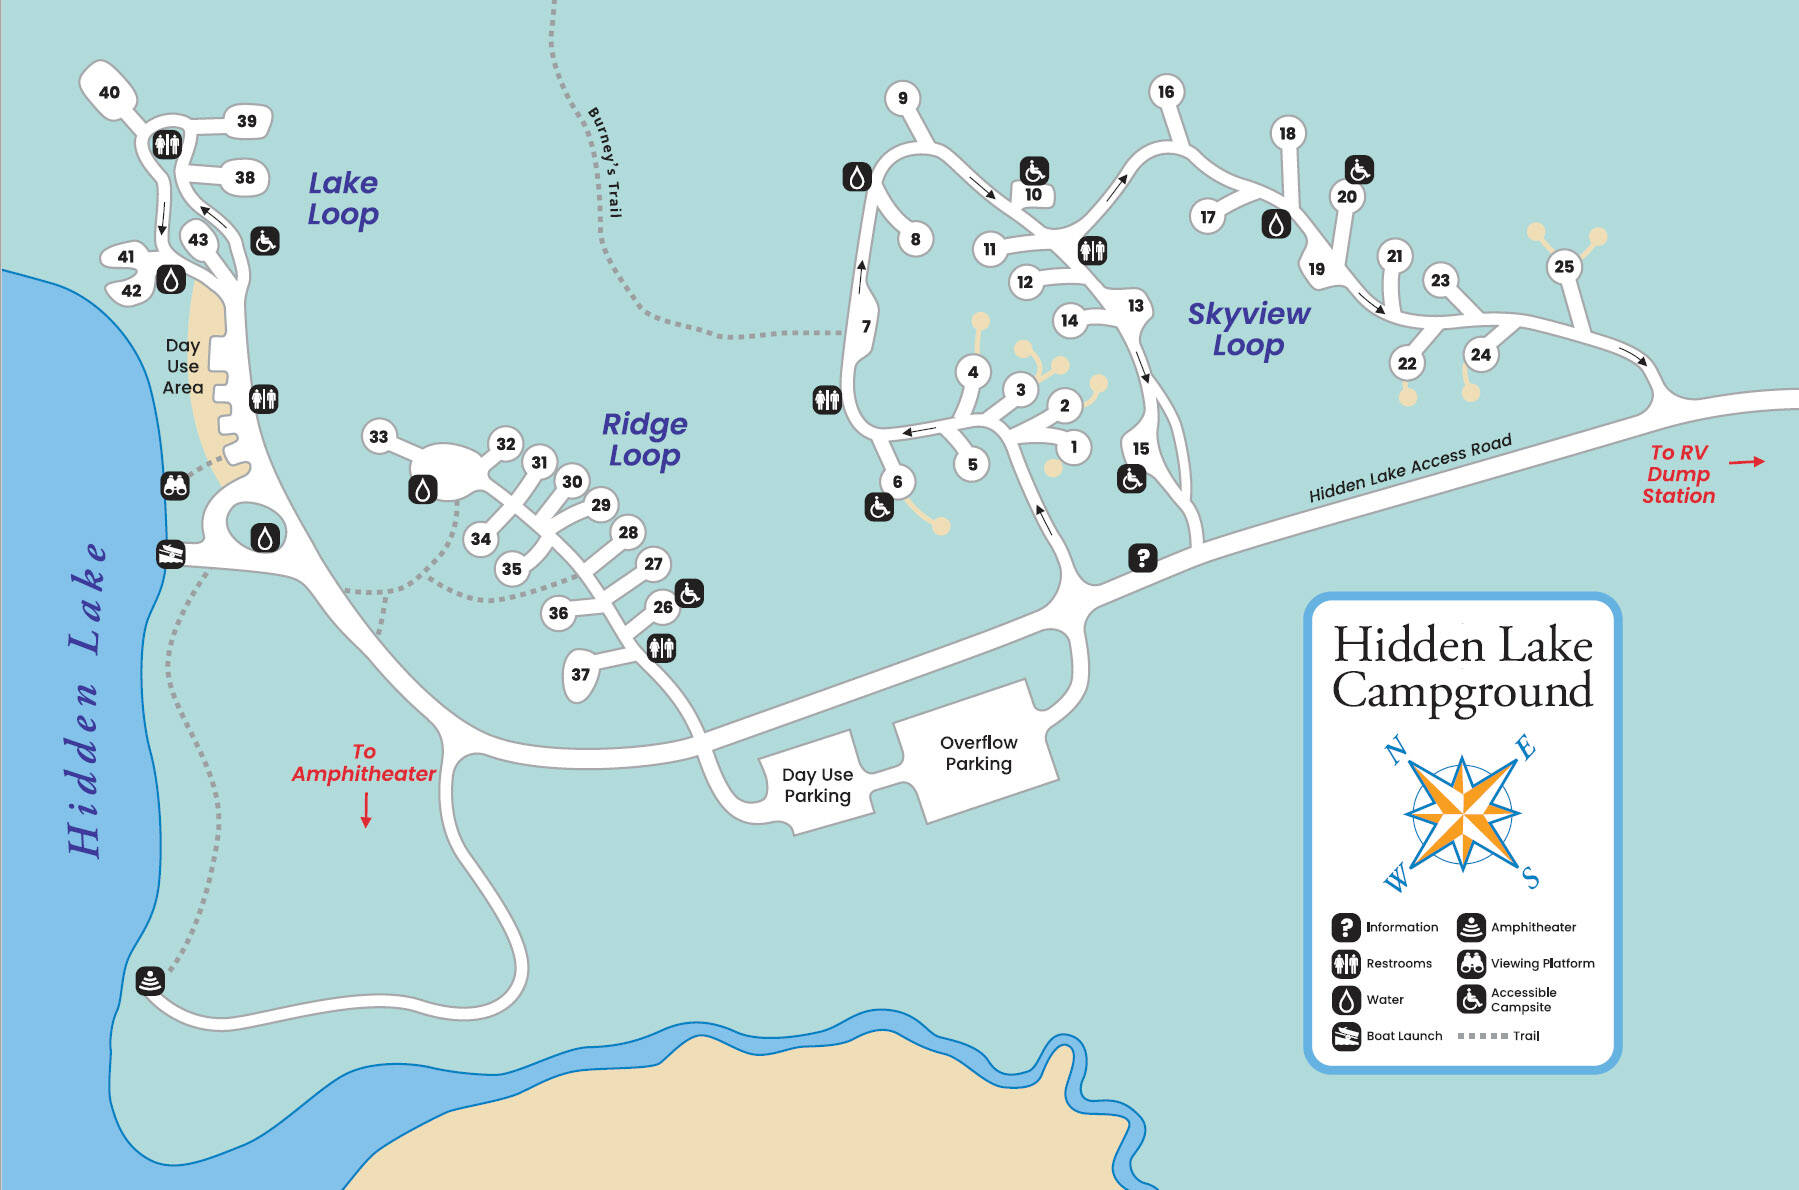 A campground map, like this one of Hidden Lake Campground, can help preplan a camping trip booked on recreation.gov. Lake and Ridge Loops are first come, first served, while sites 1-25 in Skyview Loop are available now for advanced reservations. (Photo provided)